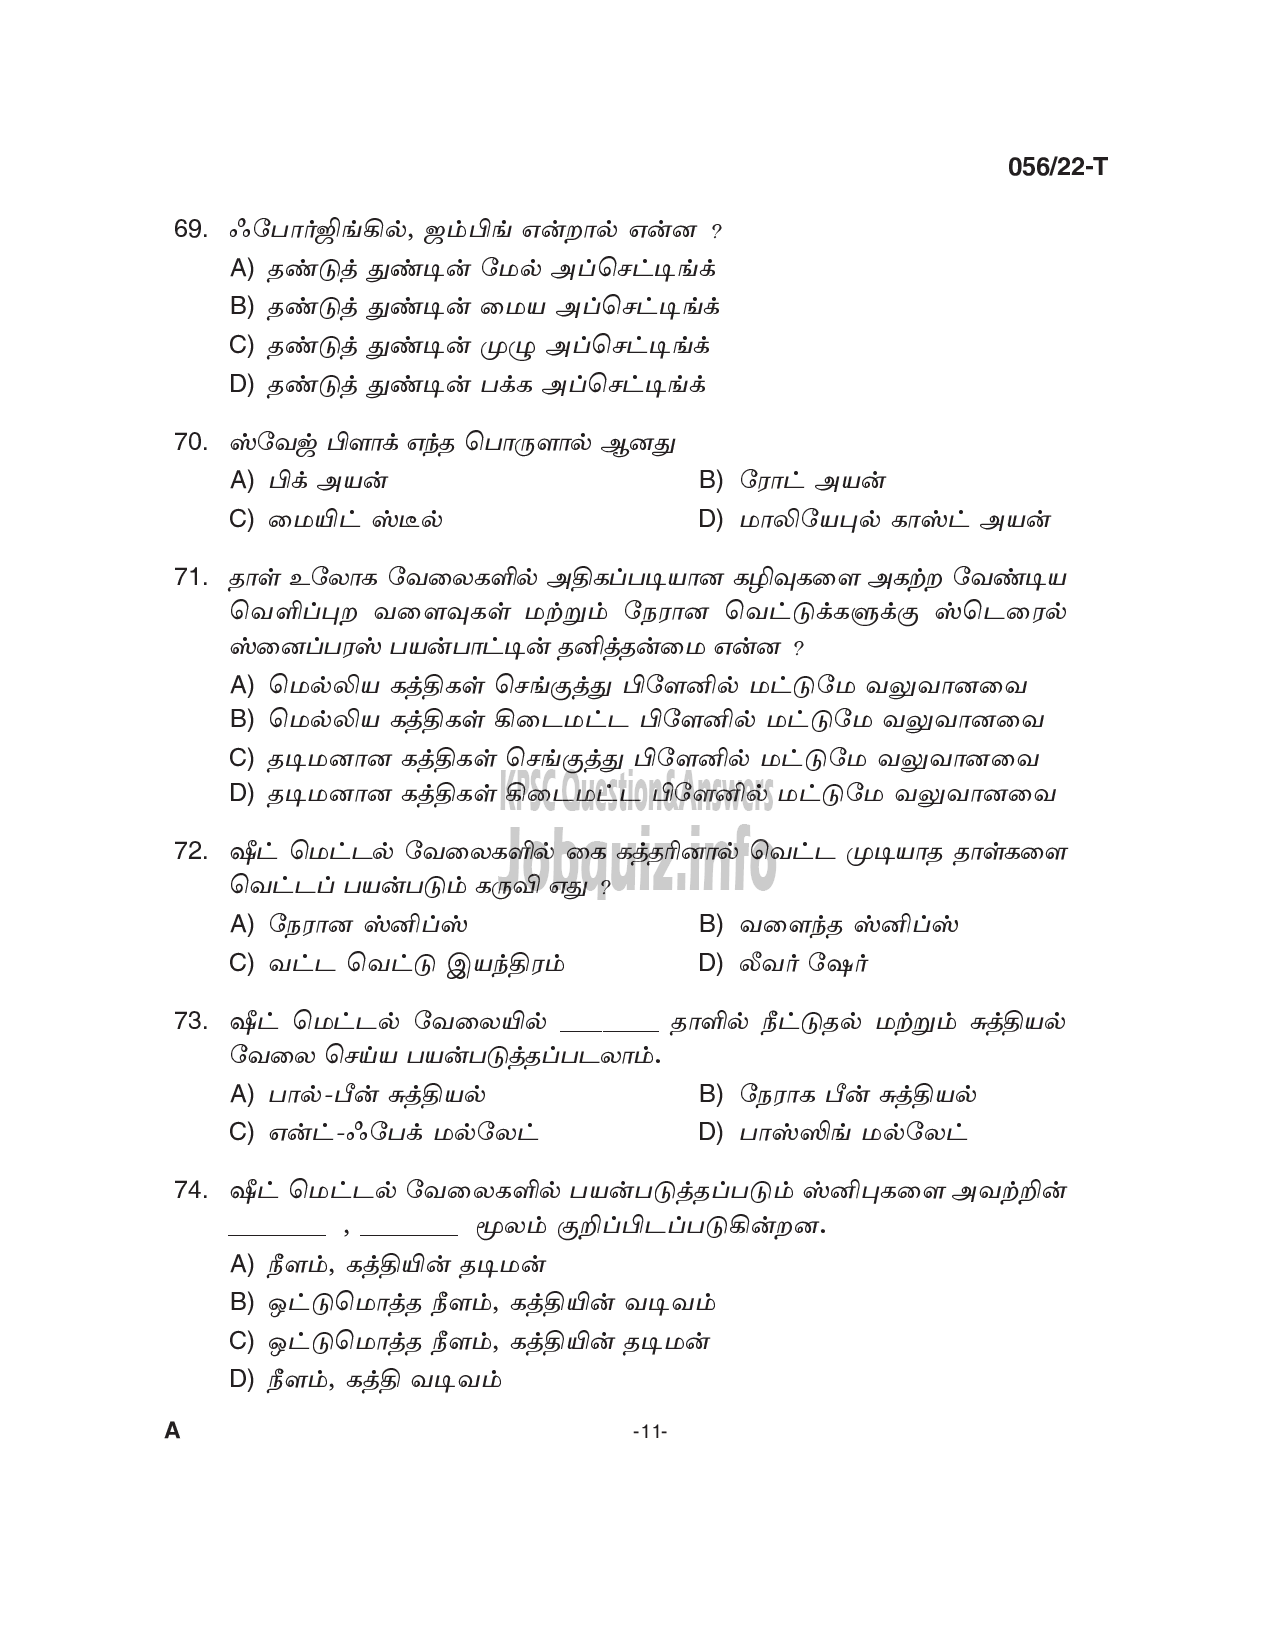 Kerala PSC Question Paper -  Fitter - Agriculture Development and Farmers Welfare-11